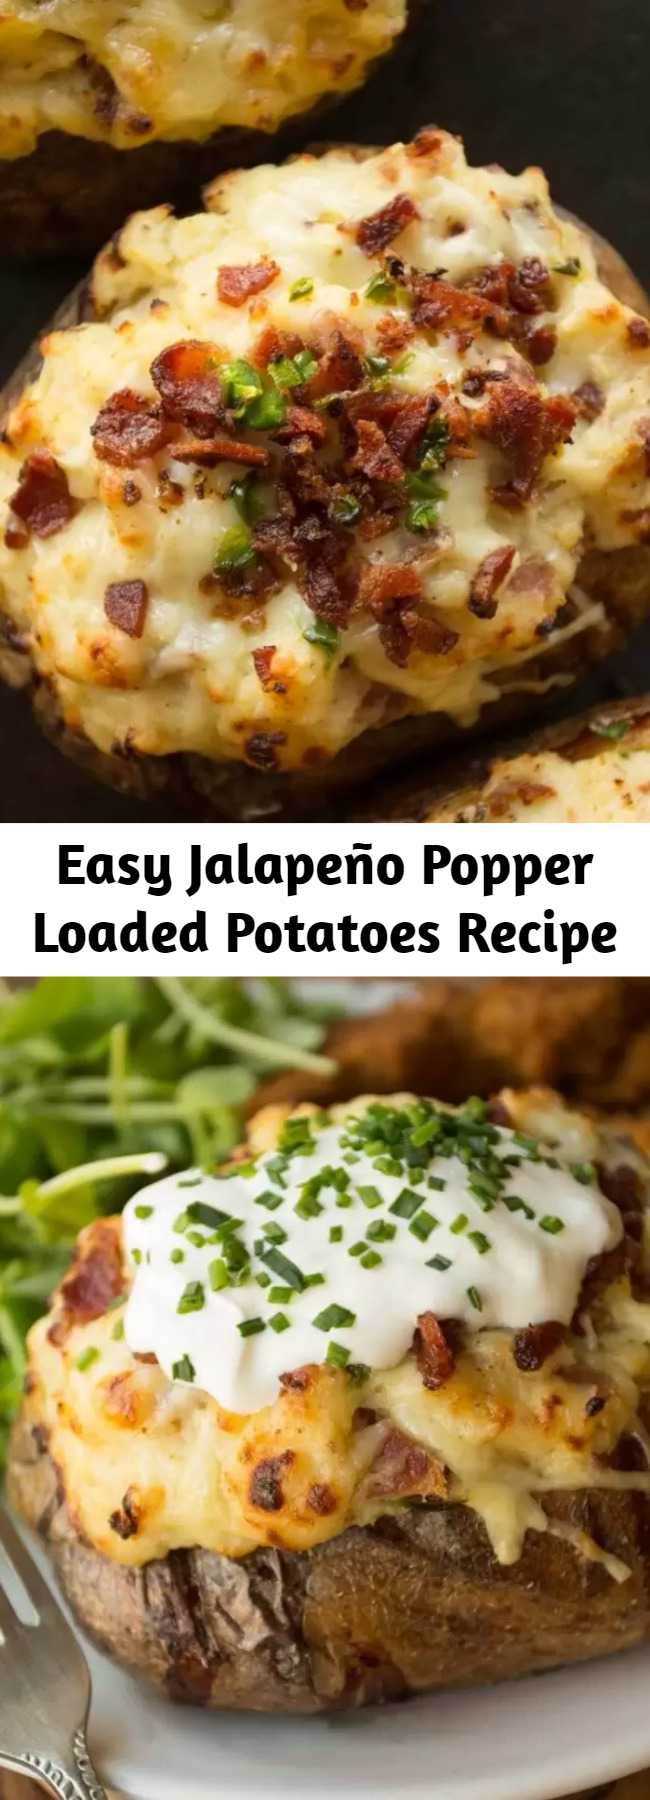 Easy Jalapeño Popper Loaded Potatoes Recipe - When two worlds collide - Twice Baked Potatoes loaded with a creamy dreamy Jalapeño Popper filling. Food comas have never been more delicious! #jalapeno #jalapenopopper #potato #bakedpotato #loadedpotato